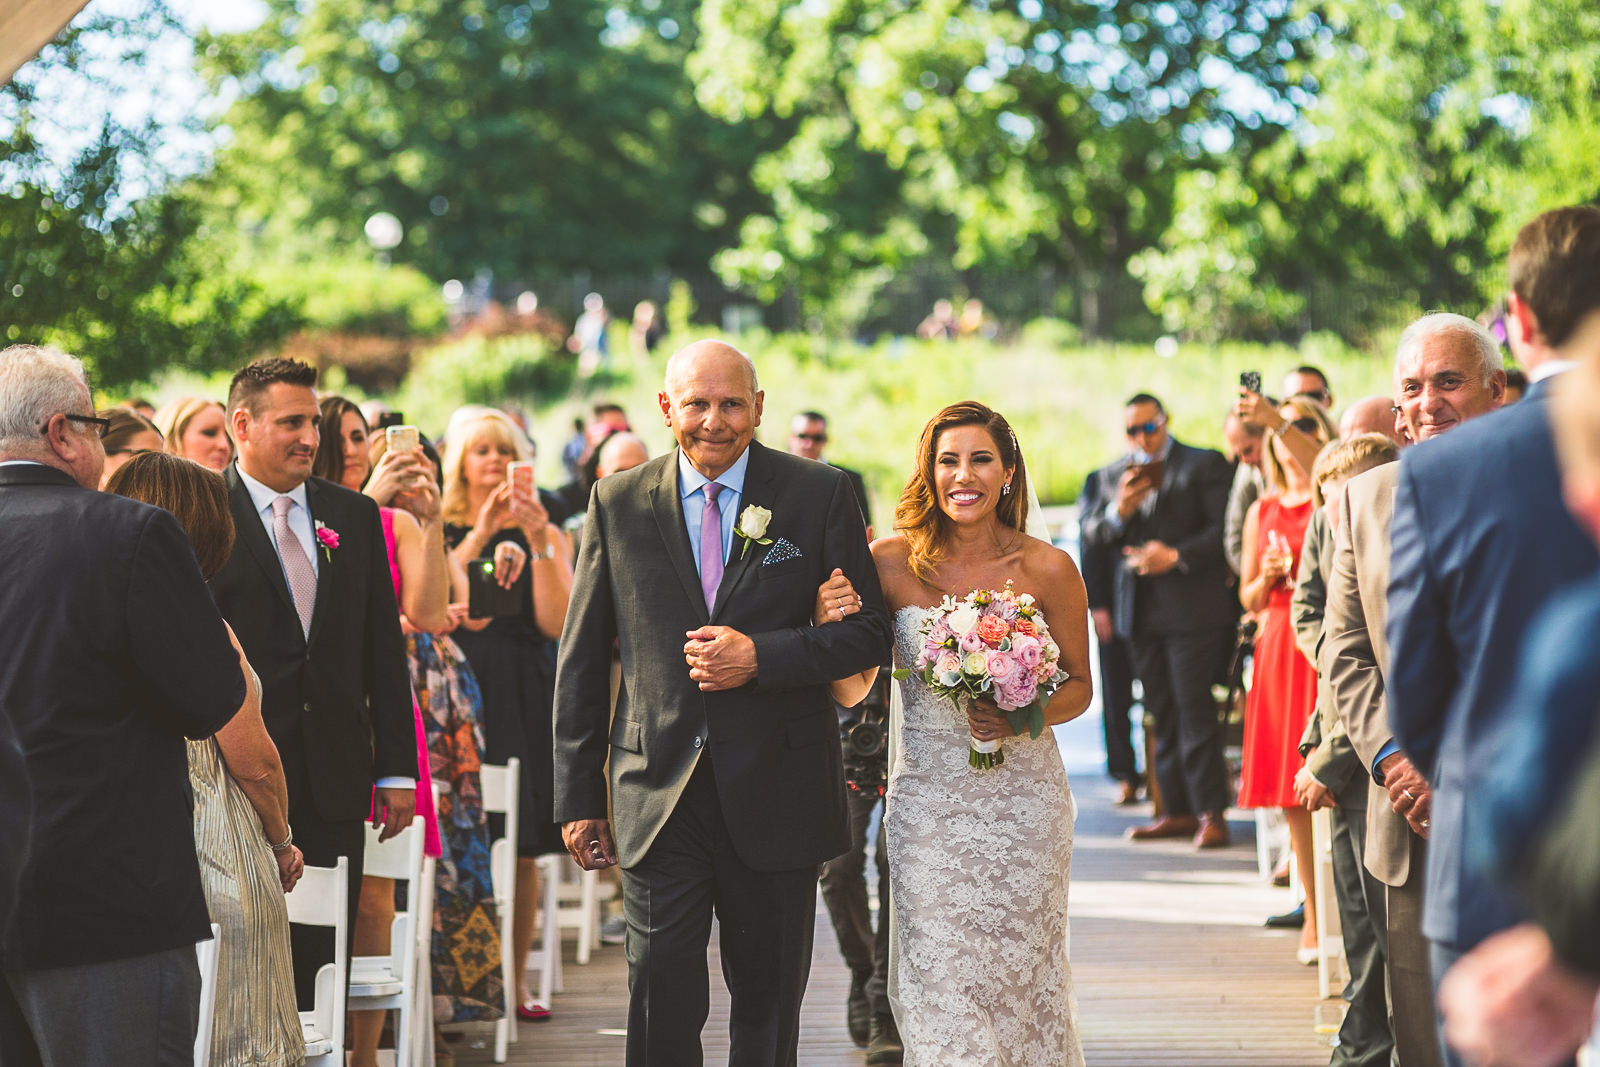 43 bride walking down the honeycomb - Natalie + Alan // Chicago Wedding Photographer at Cafe Brauer